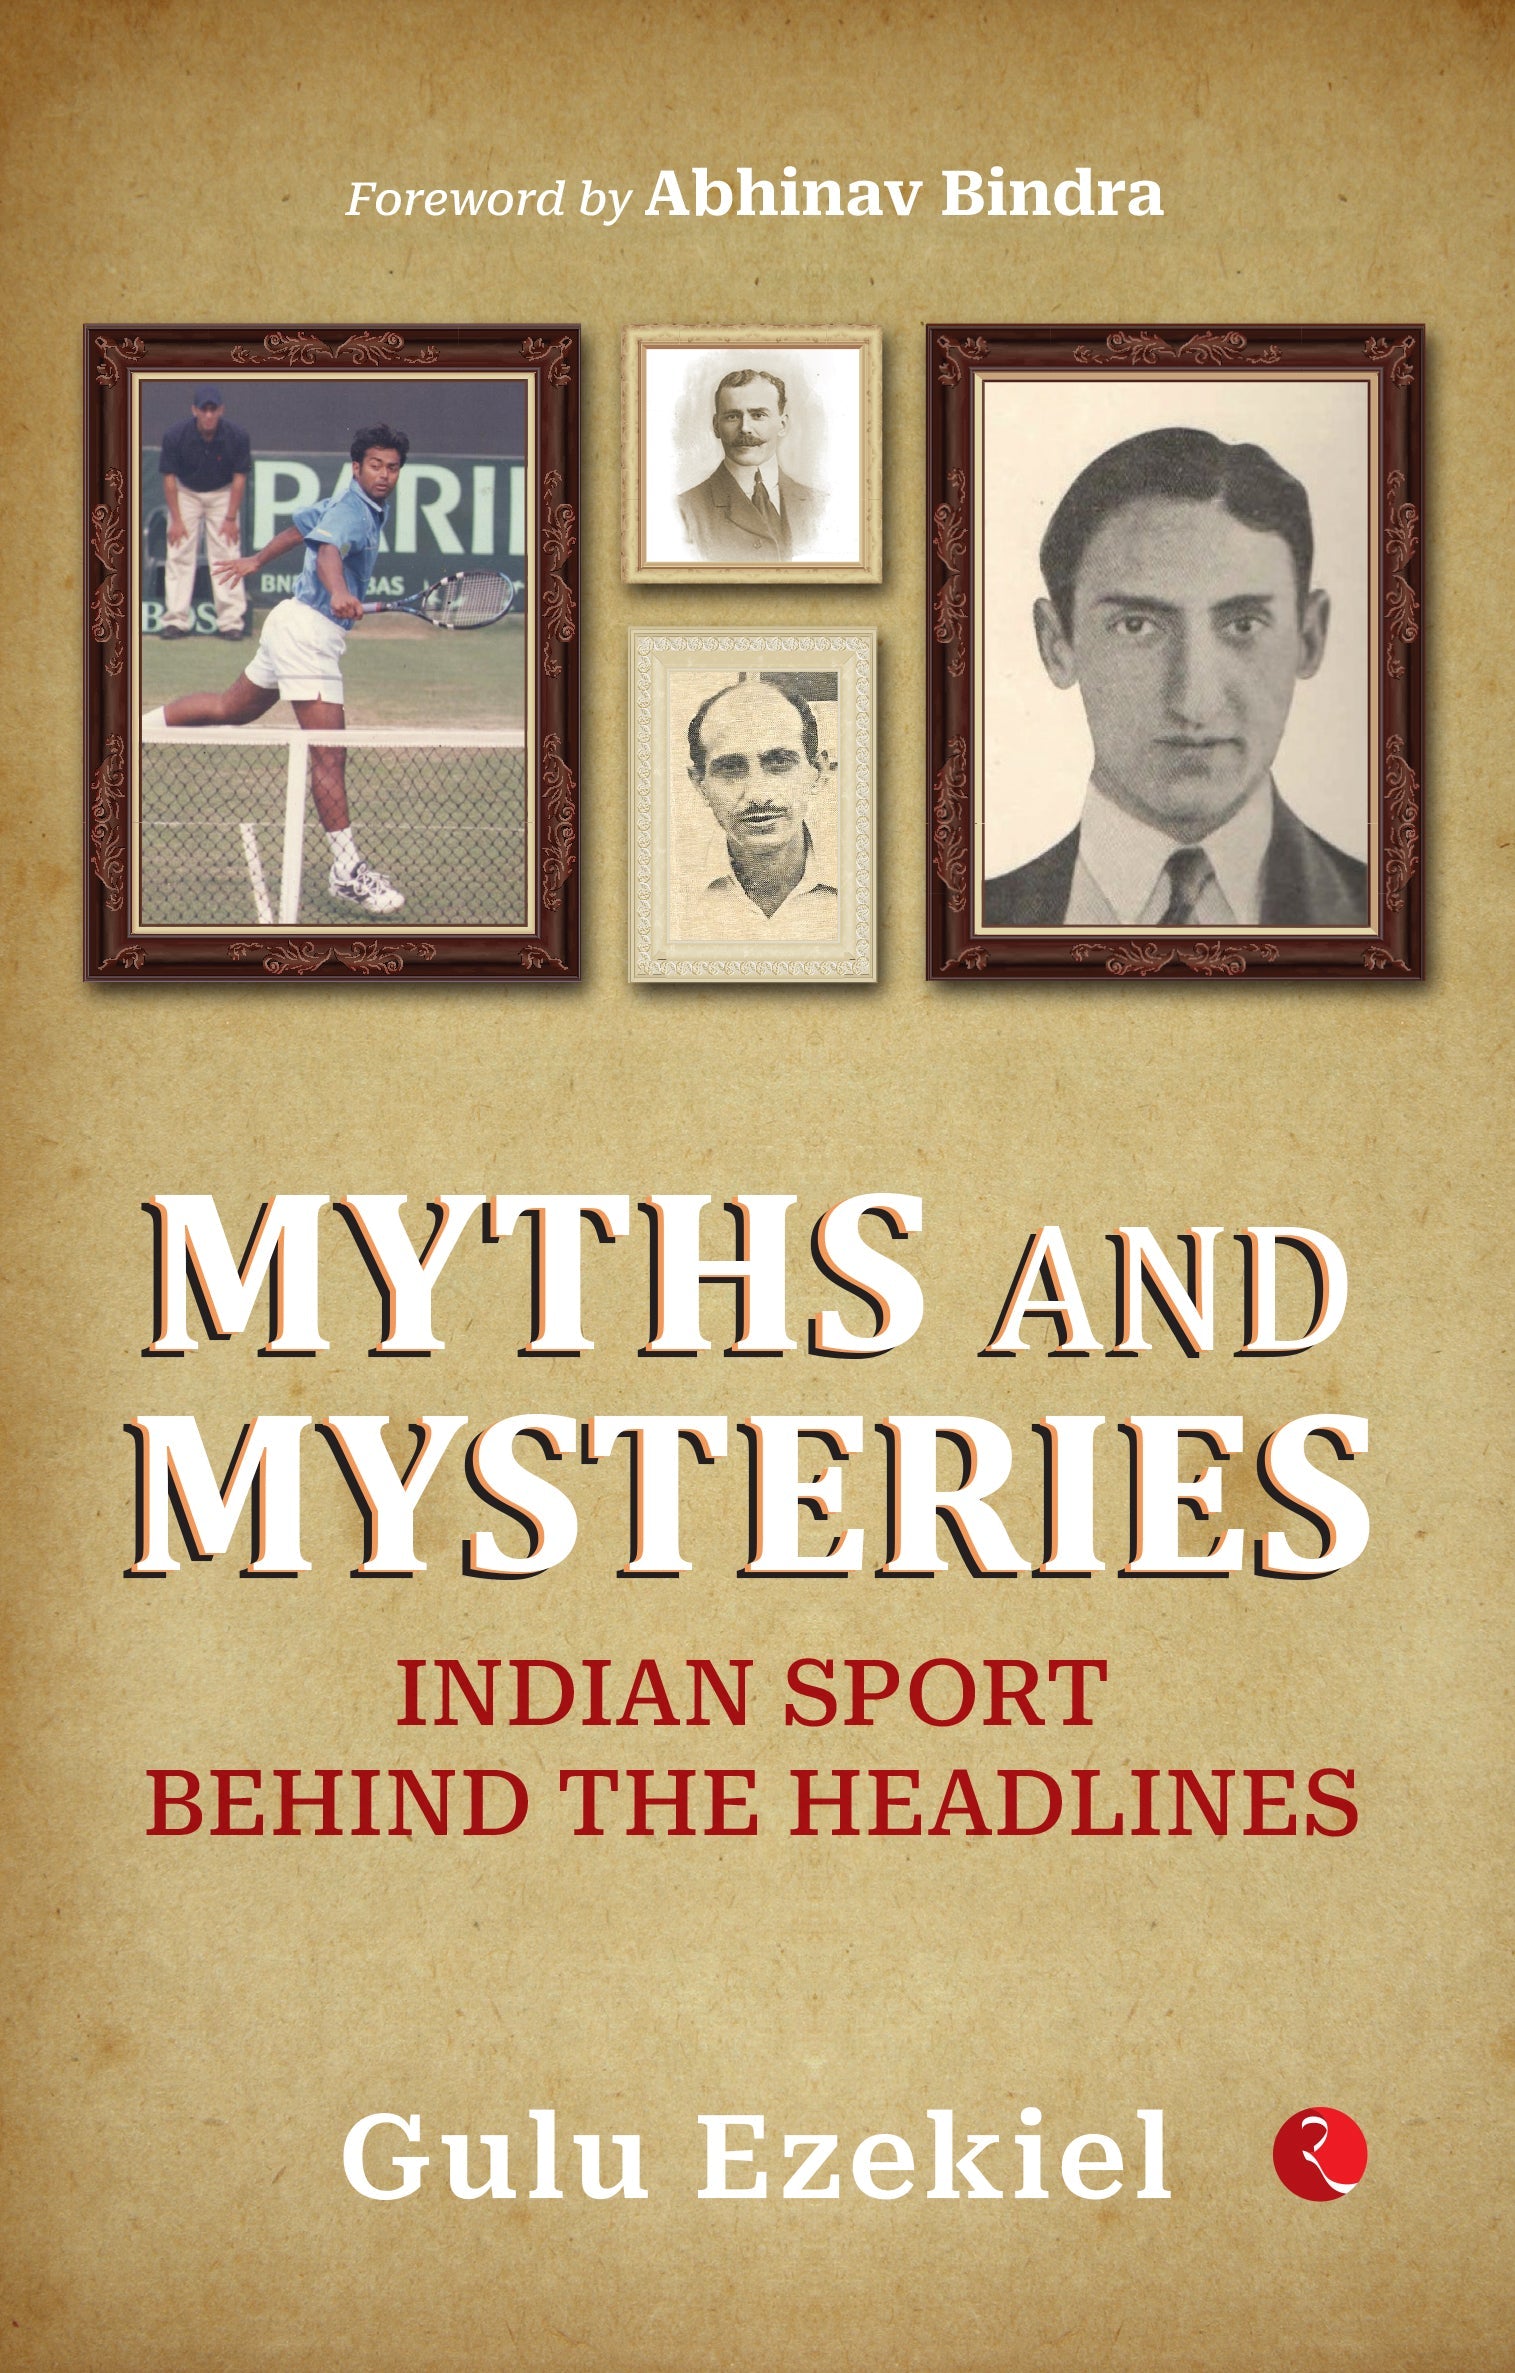 MYTHS AND MYSTERIES INDIAN SPORTS